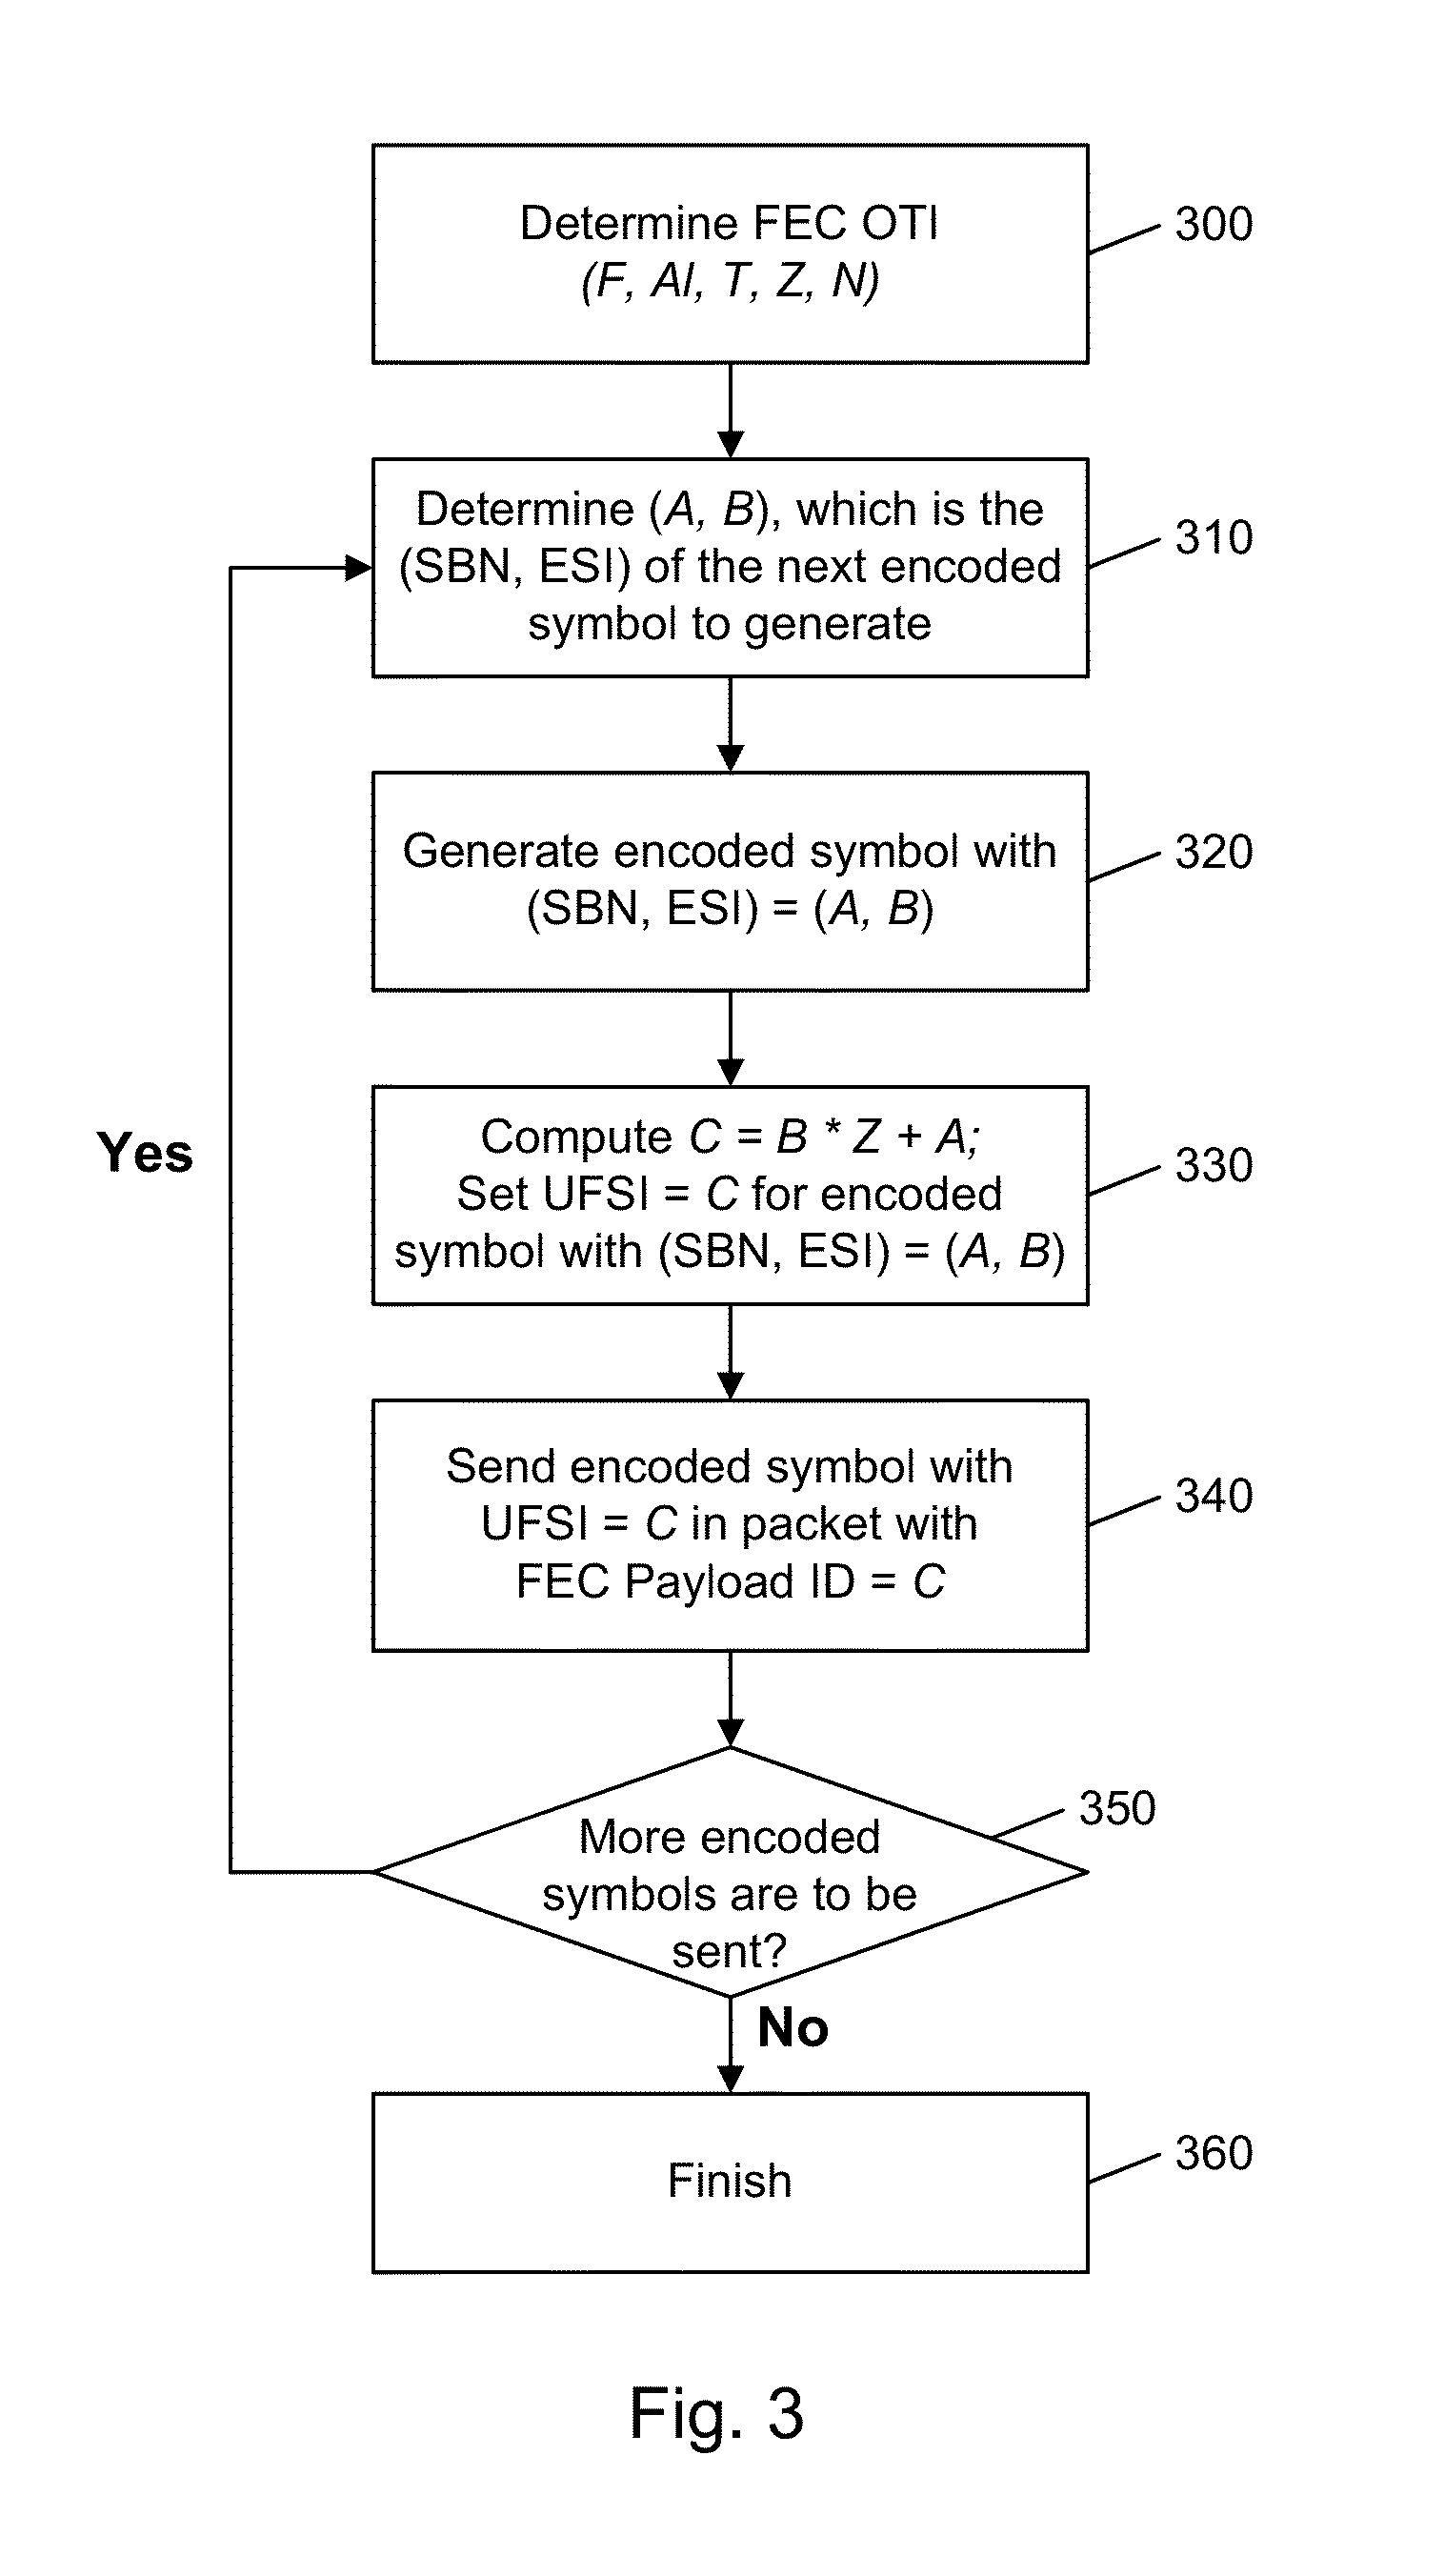 Content delivery system with allocation of source data and repair data among HTTP servers